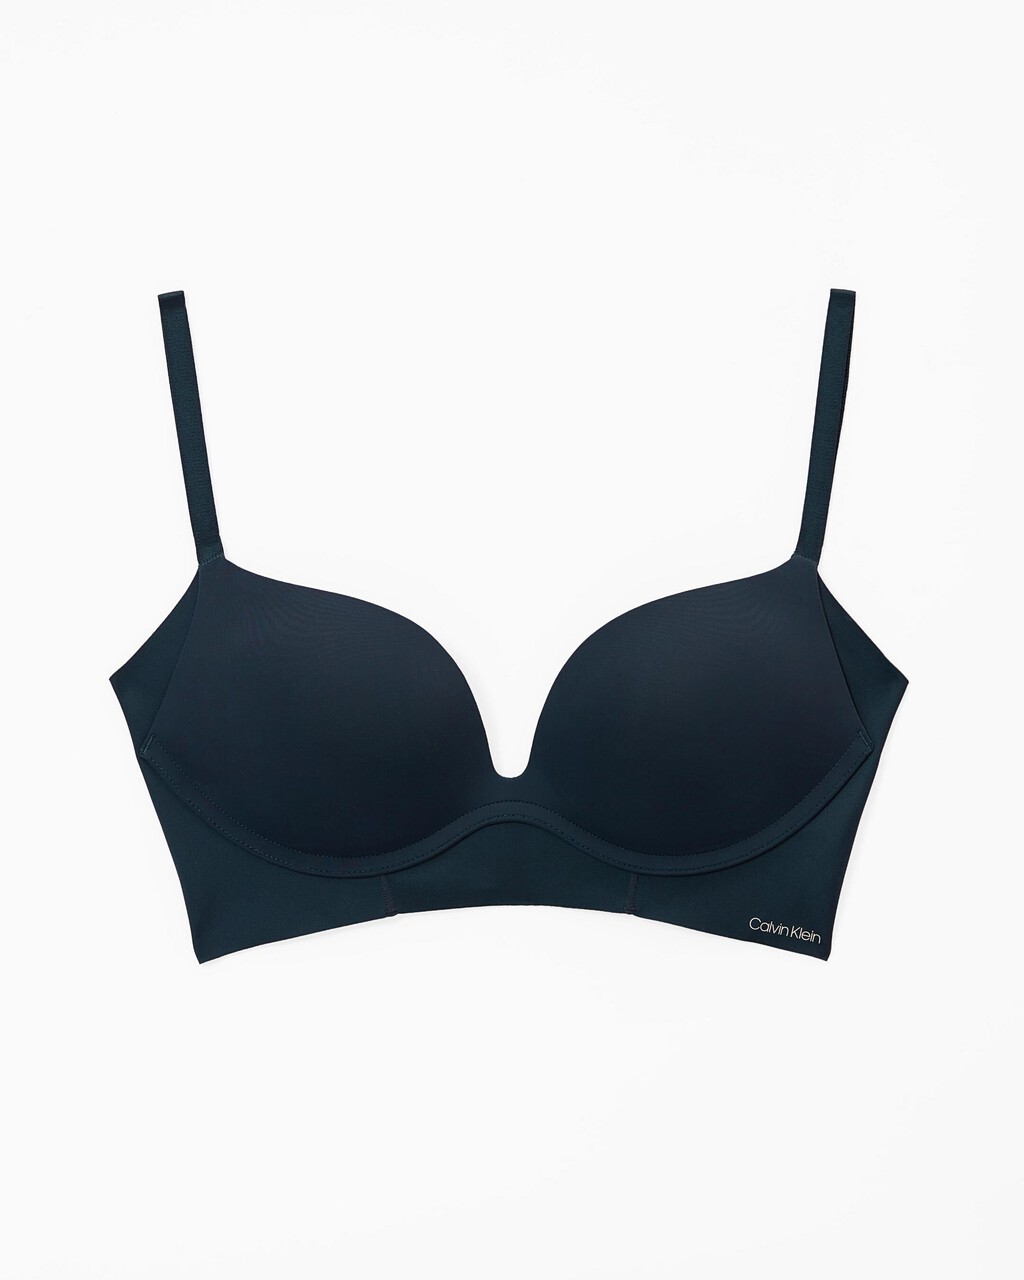 Invisibles Push Up Plunge Bra, Blueberry, hi-res